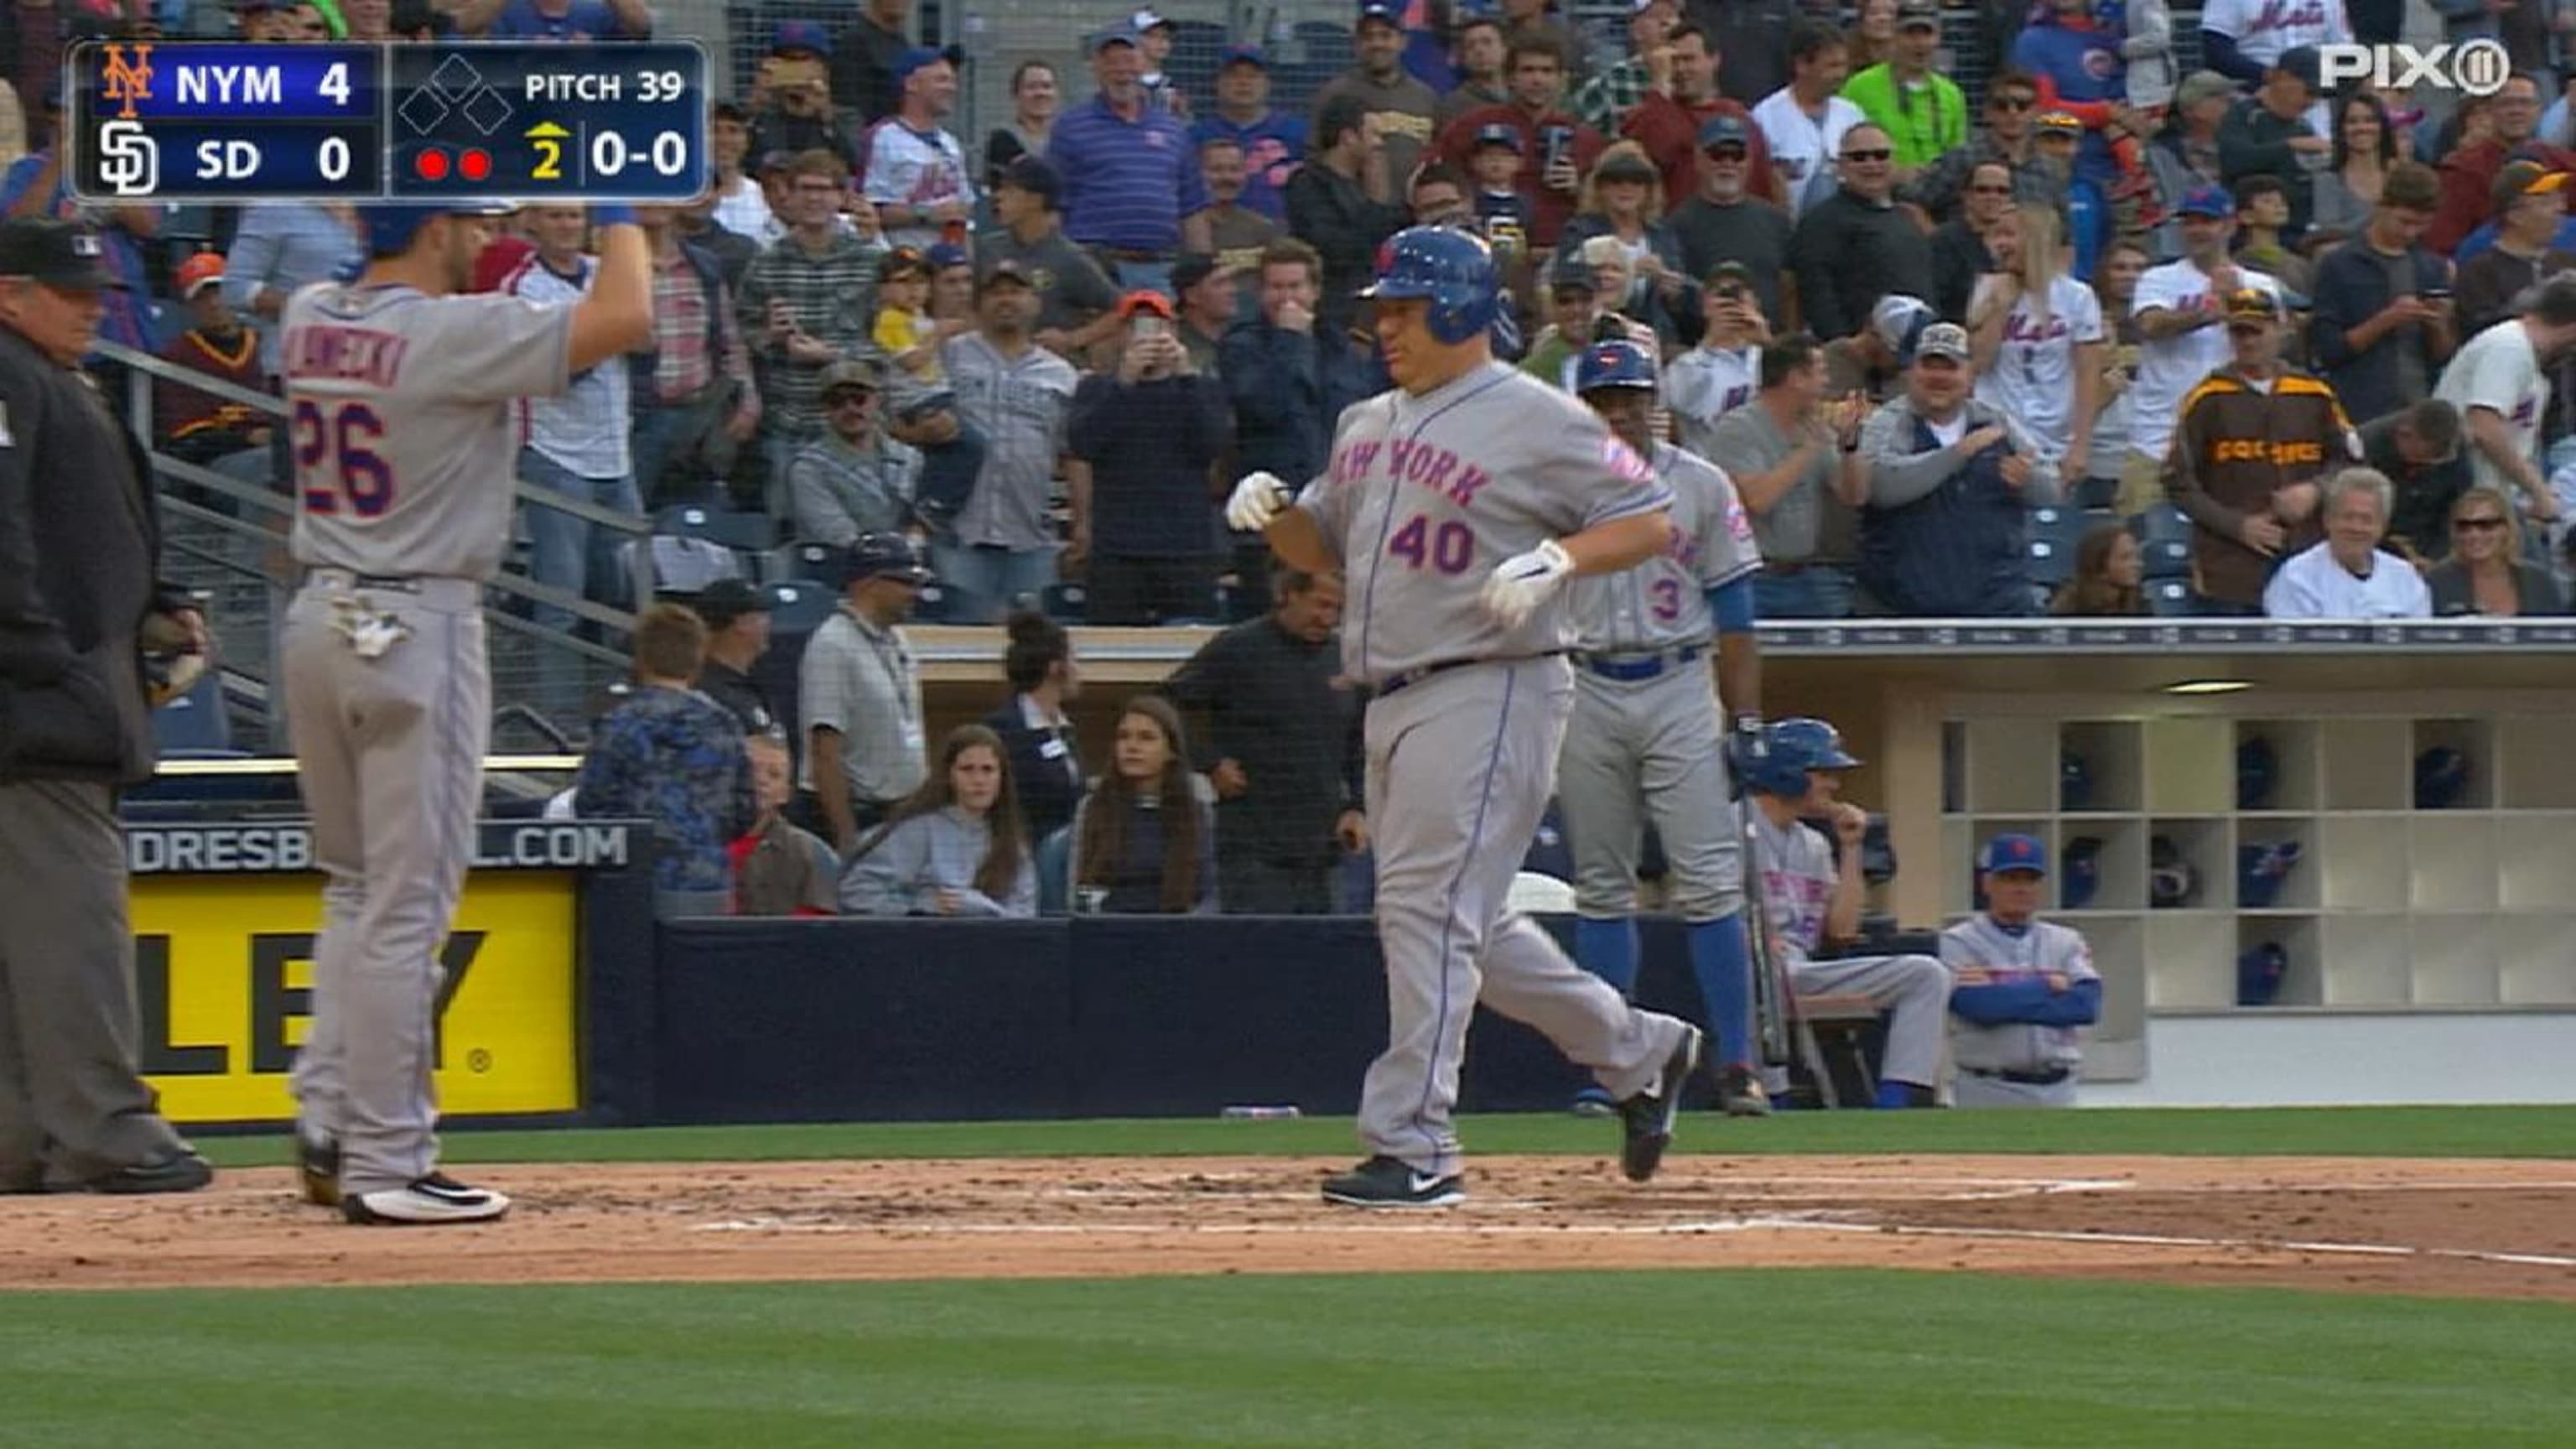 Bartolo Colon is throwing complete games at 48 years old